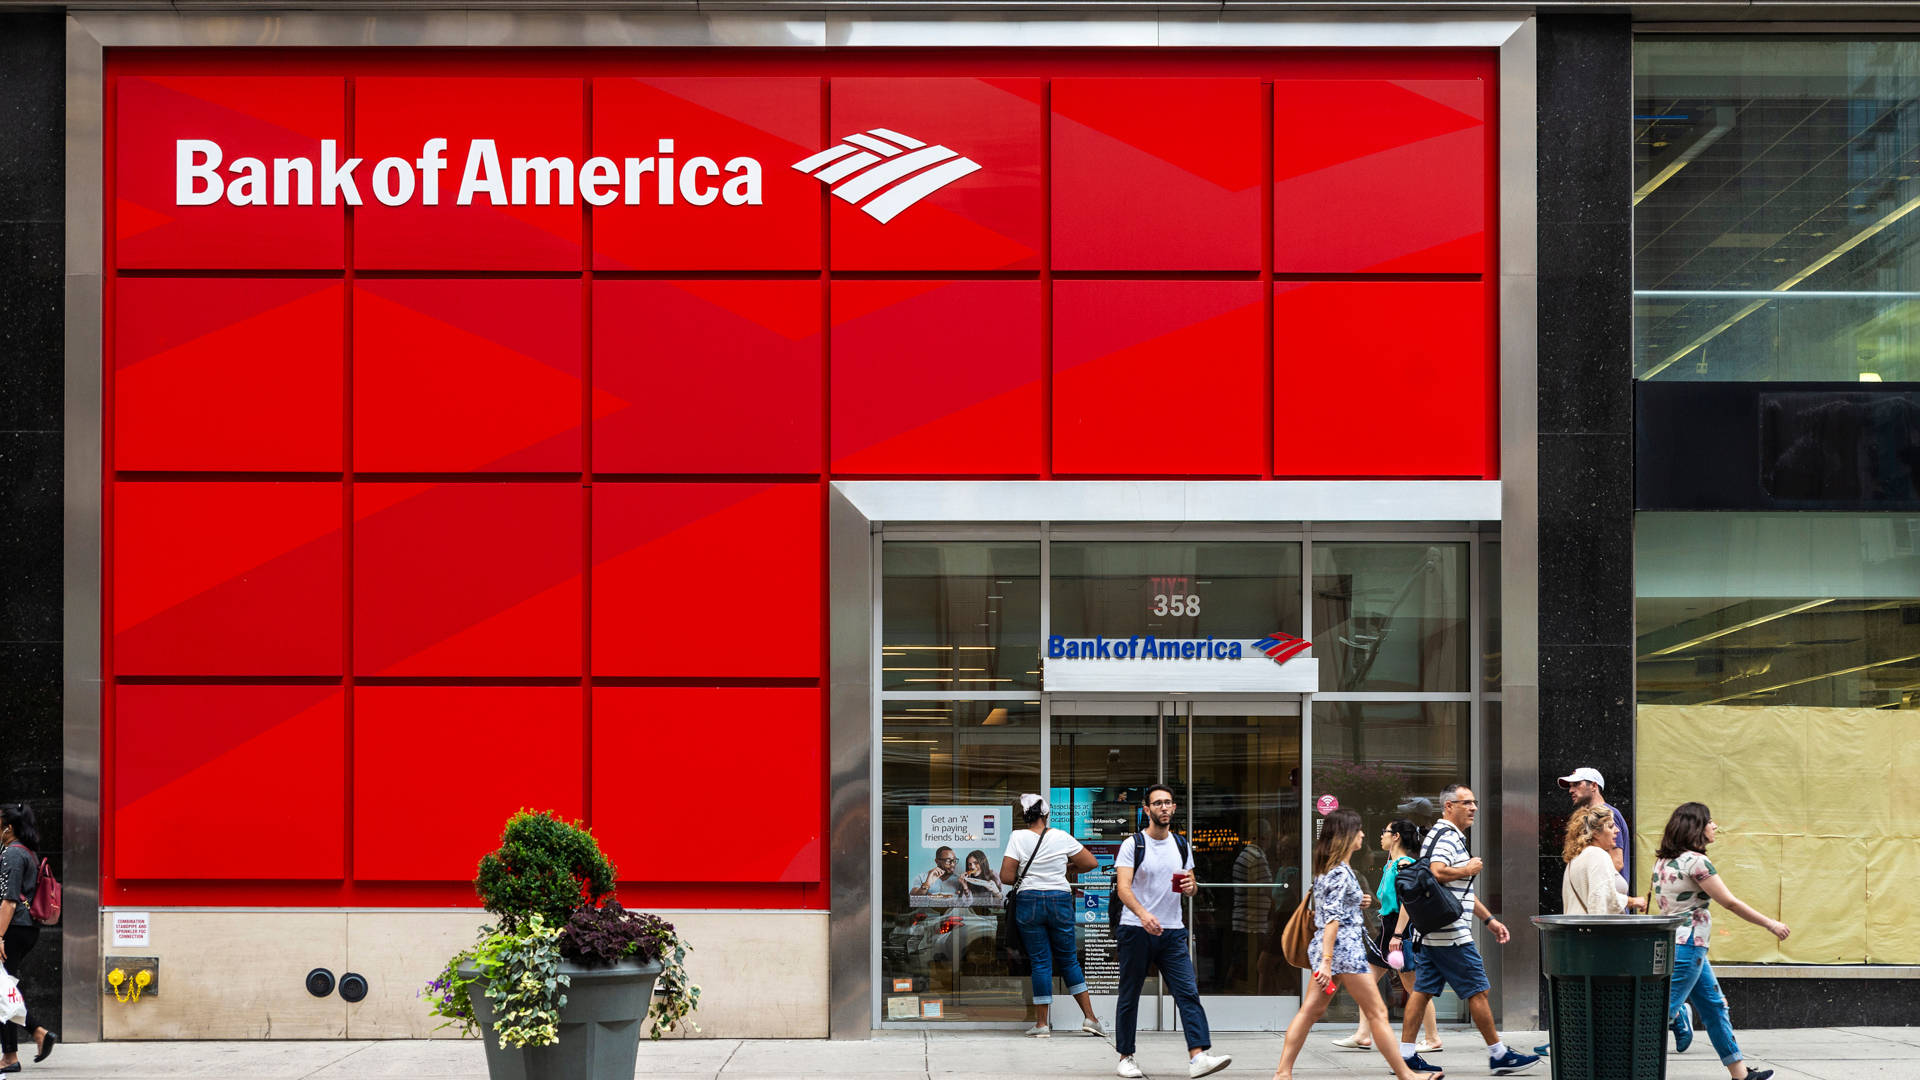 Bank Of America Red Facade Picture